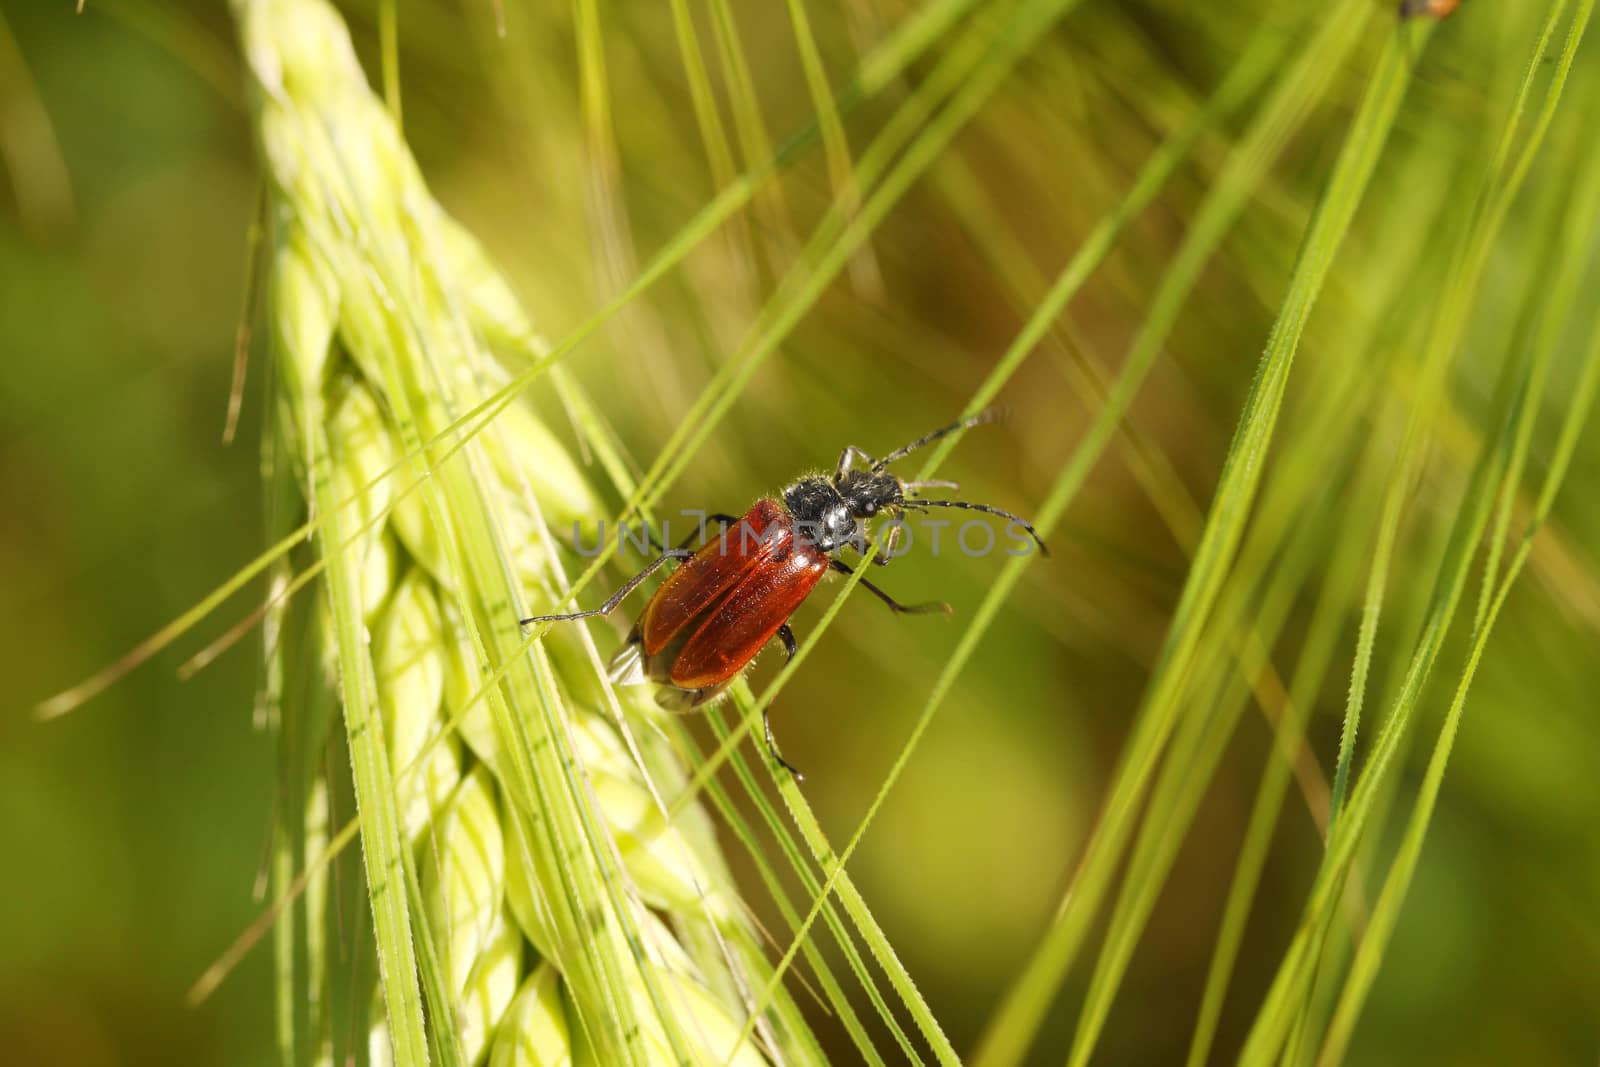 Beetle on a spike in a wheat field by indigolotos